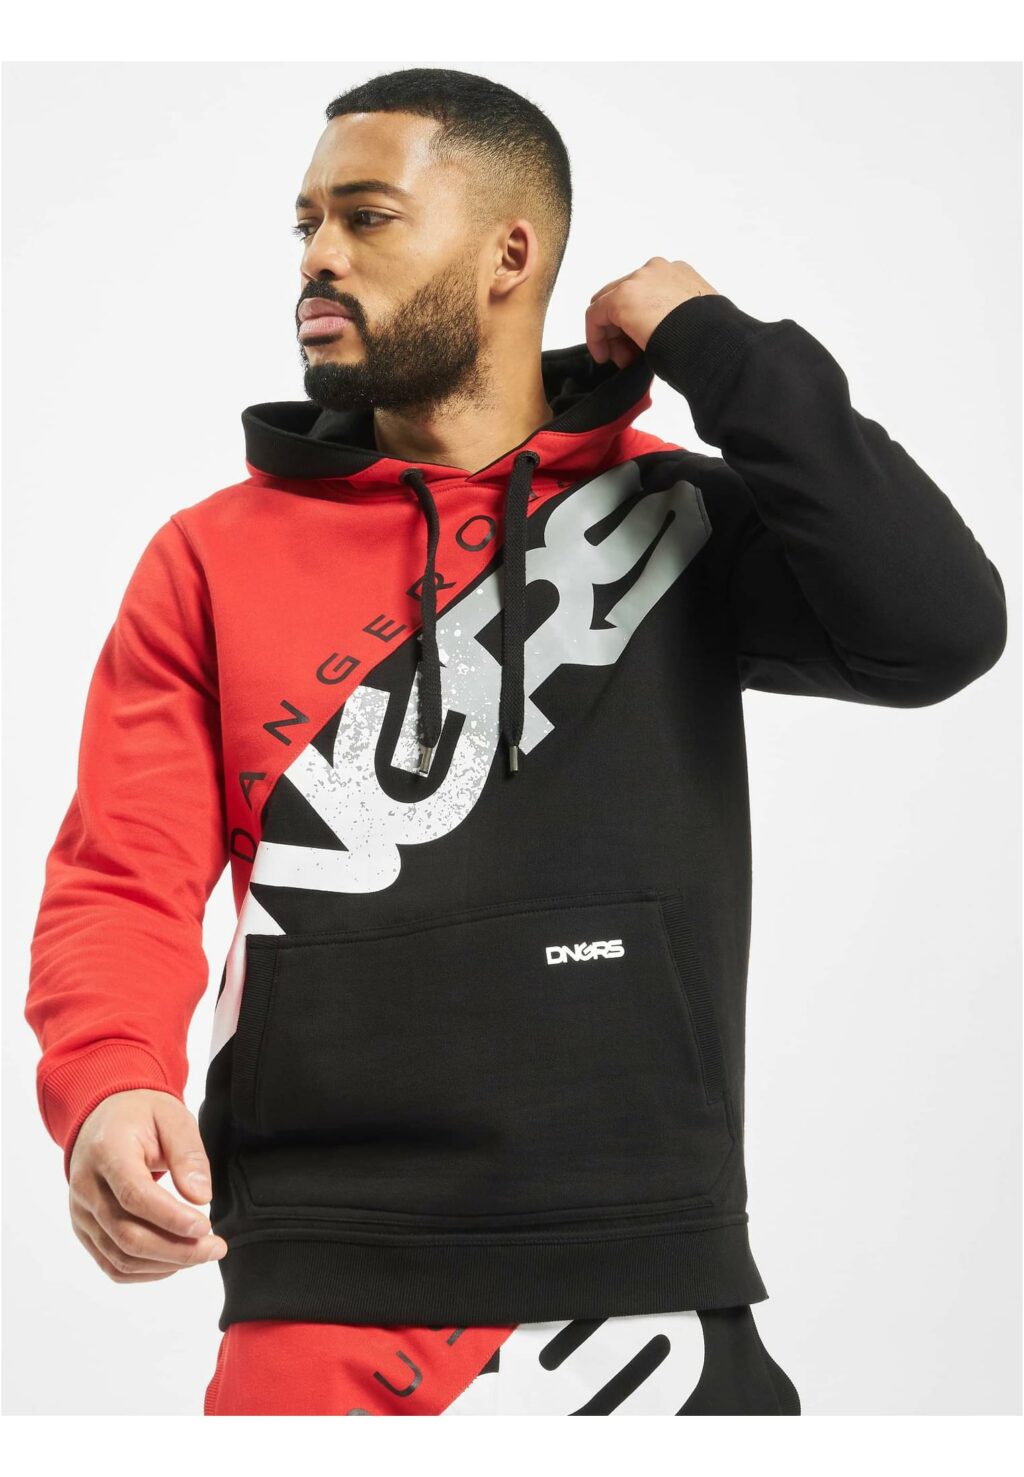 Proteles Hoody black/red DGHD425